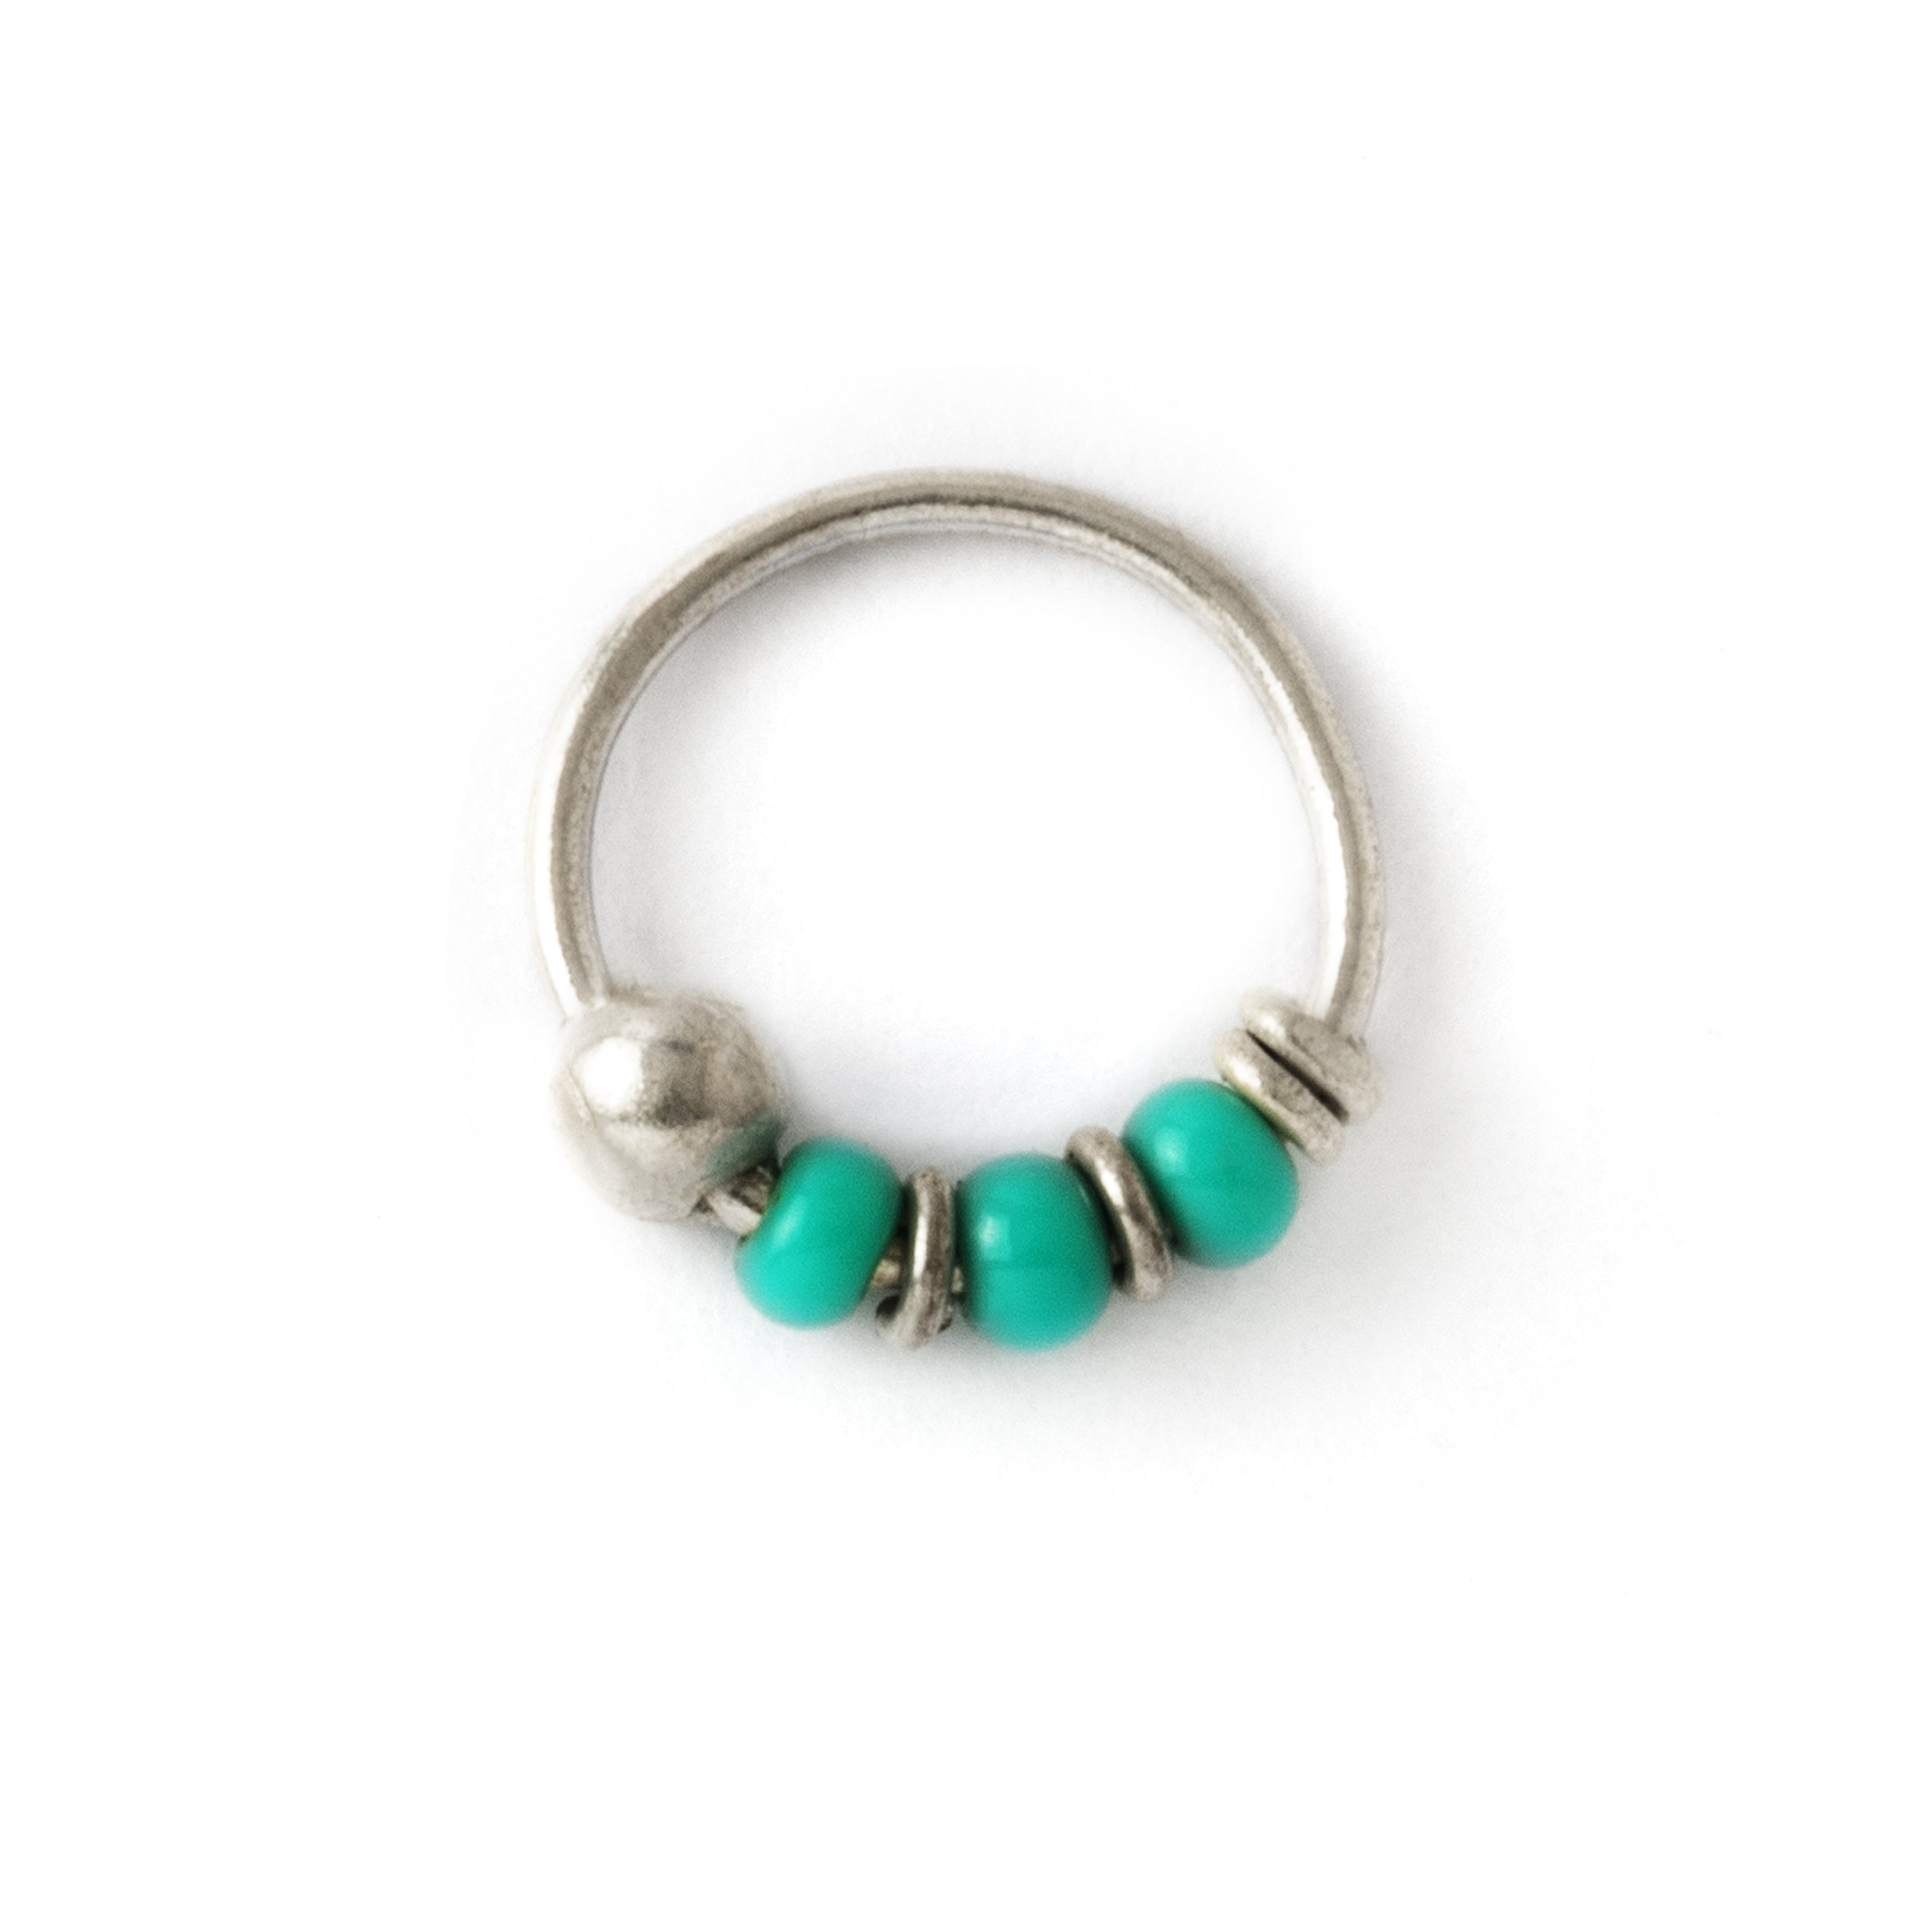 Silver nose ring with turquoise beads frontal view